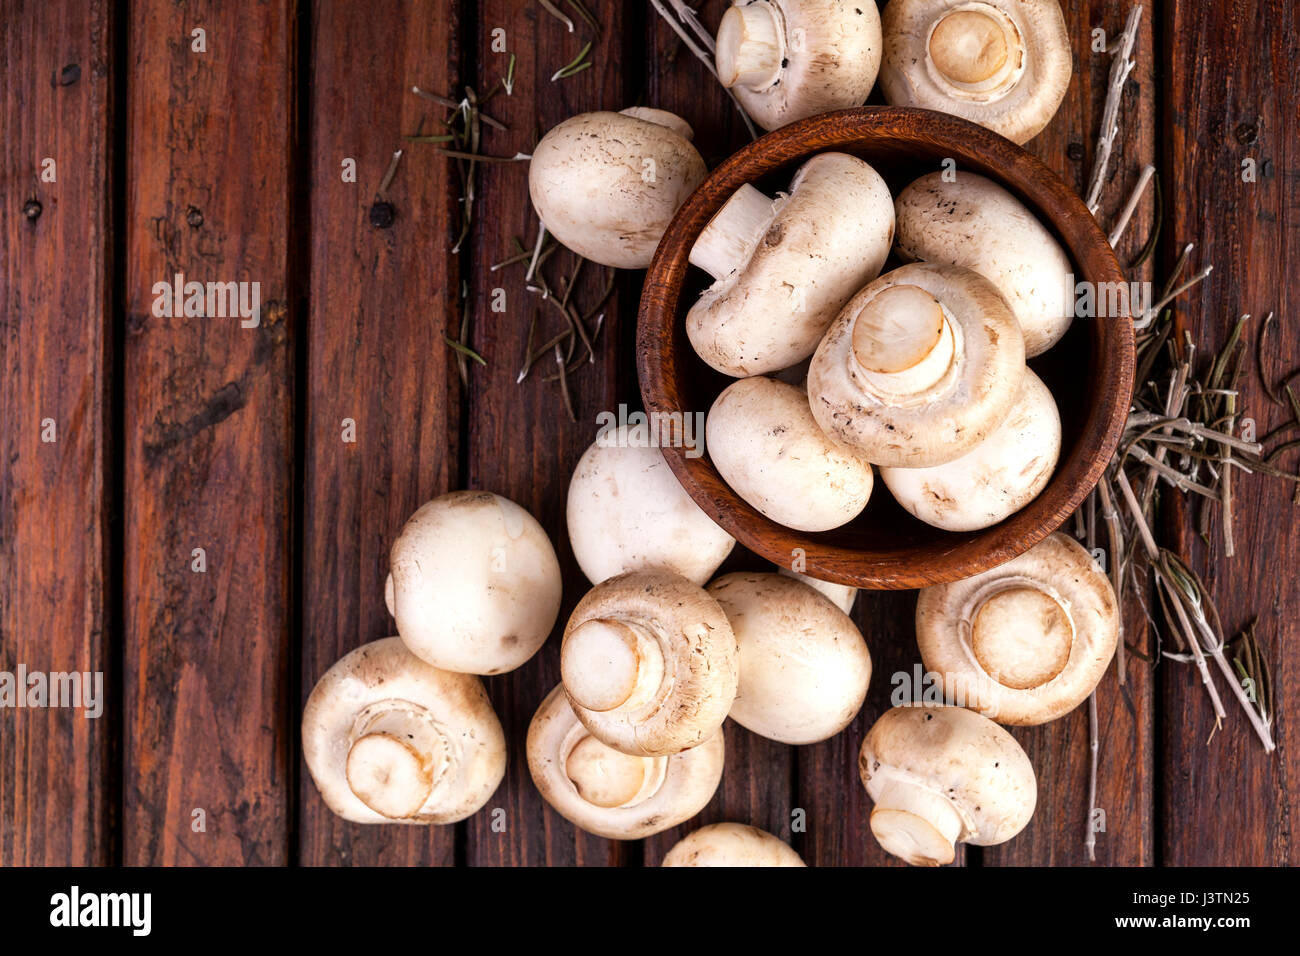 Mushrooms champignon on wooden background. Top view. Copy space. Stock Photo